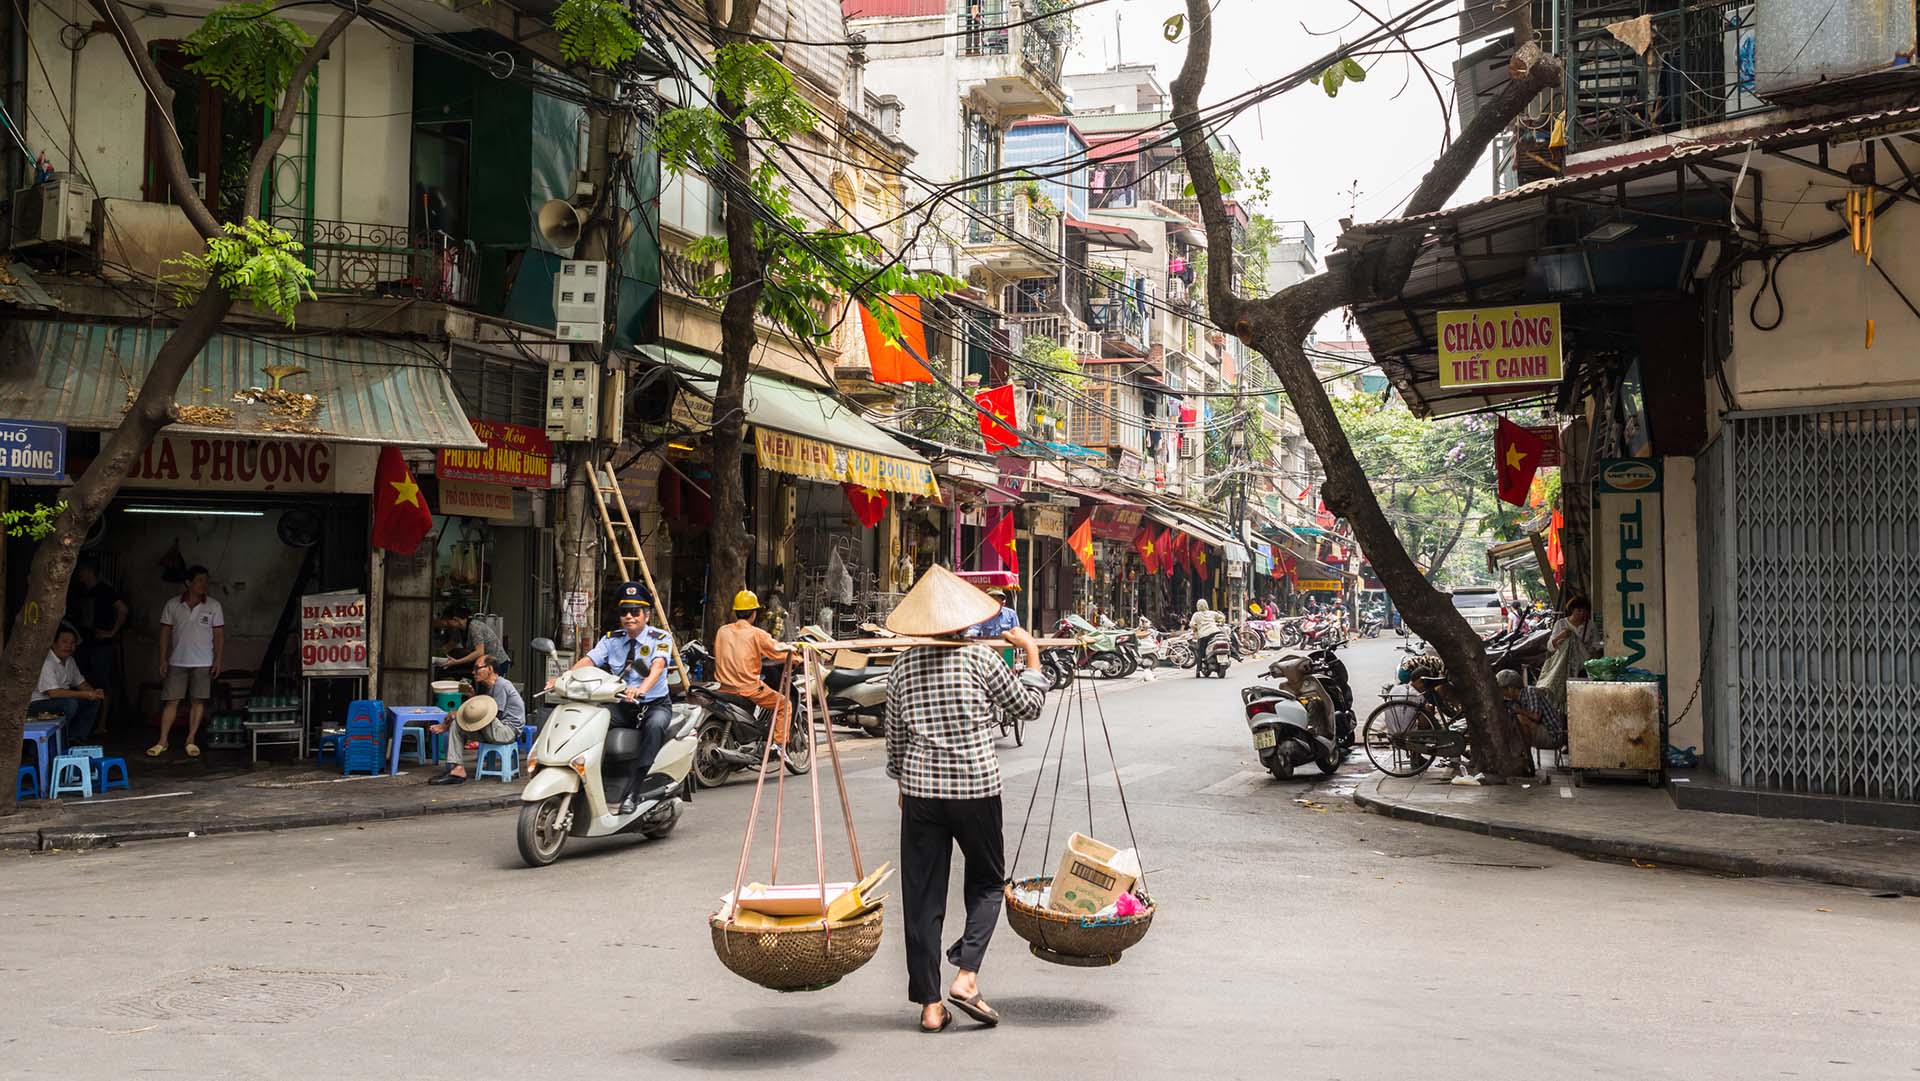 Hanoi, Vietnam - May 19, 2016: Street vendor carrying transporting goods in baskets using a carrying pole, also called a shoulder pole, in Hanoi's Old Quarter.